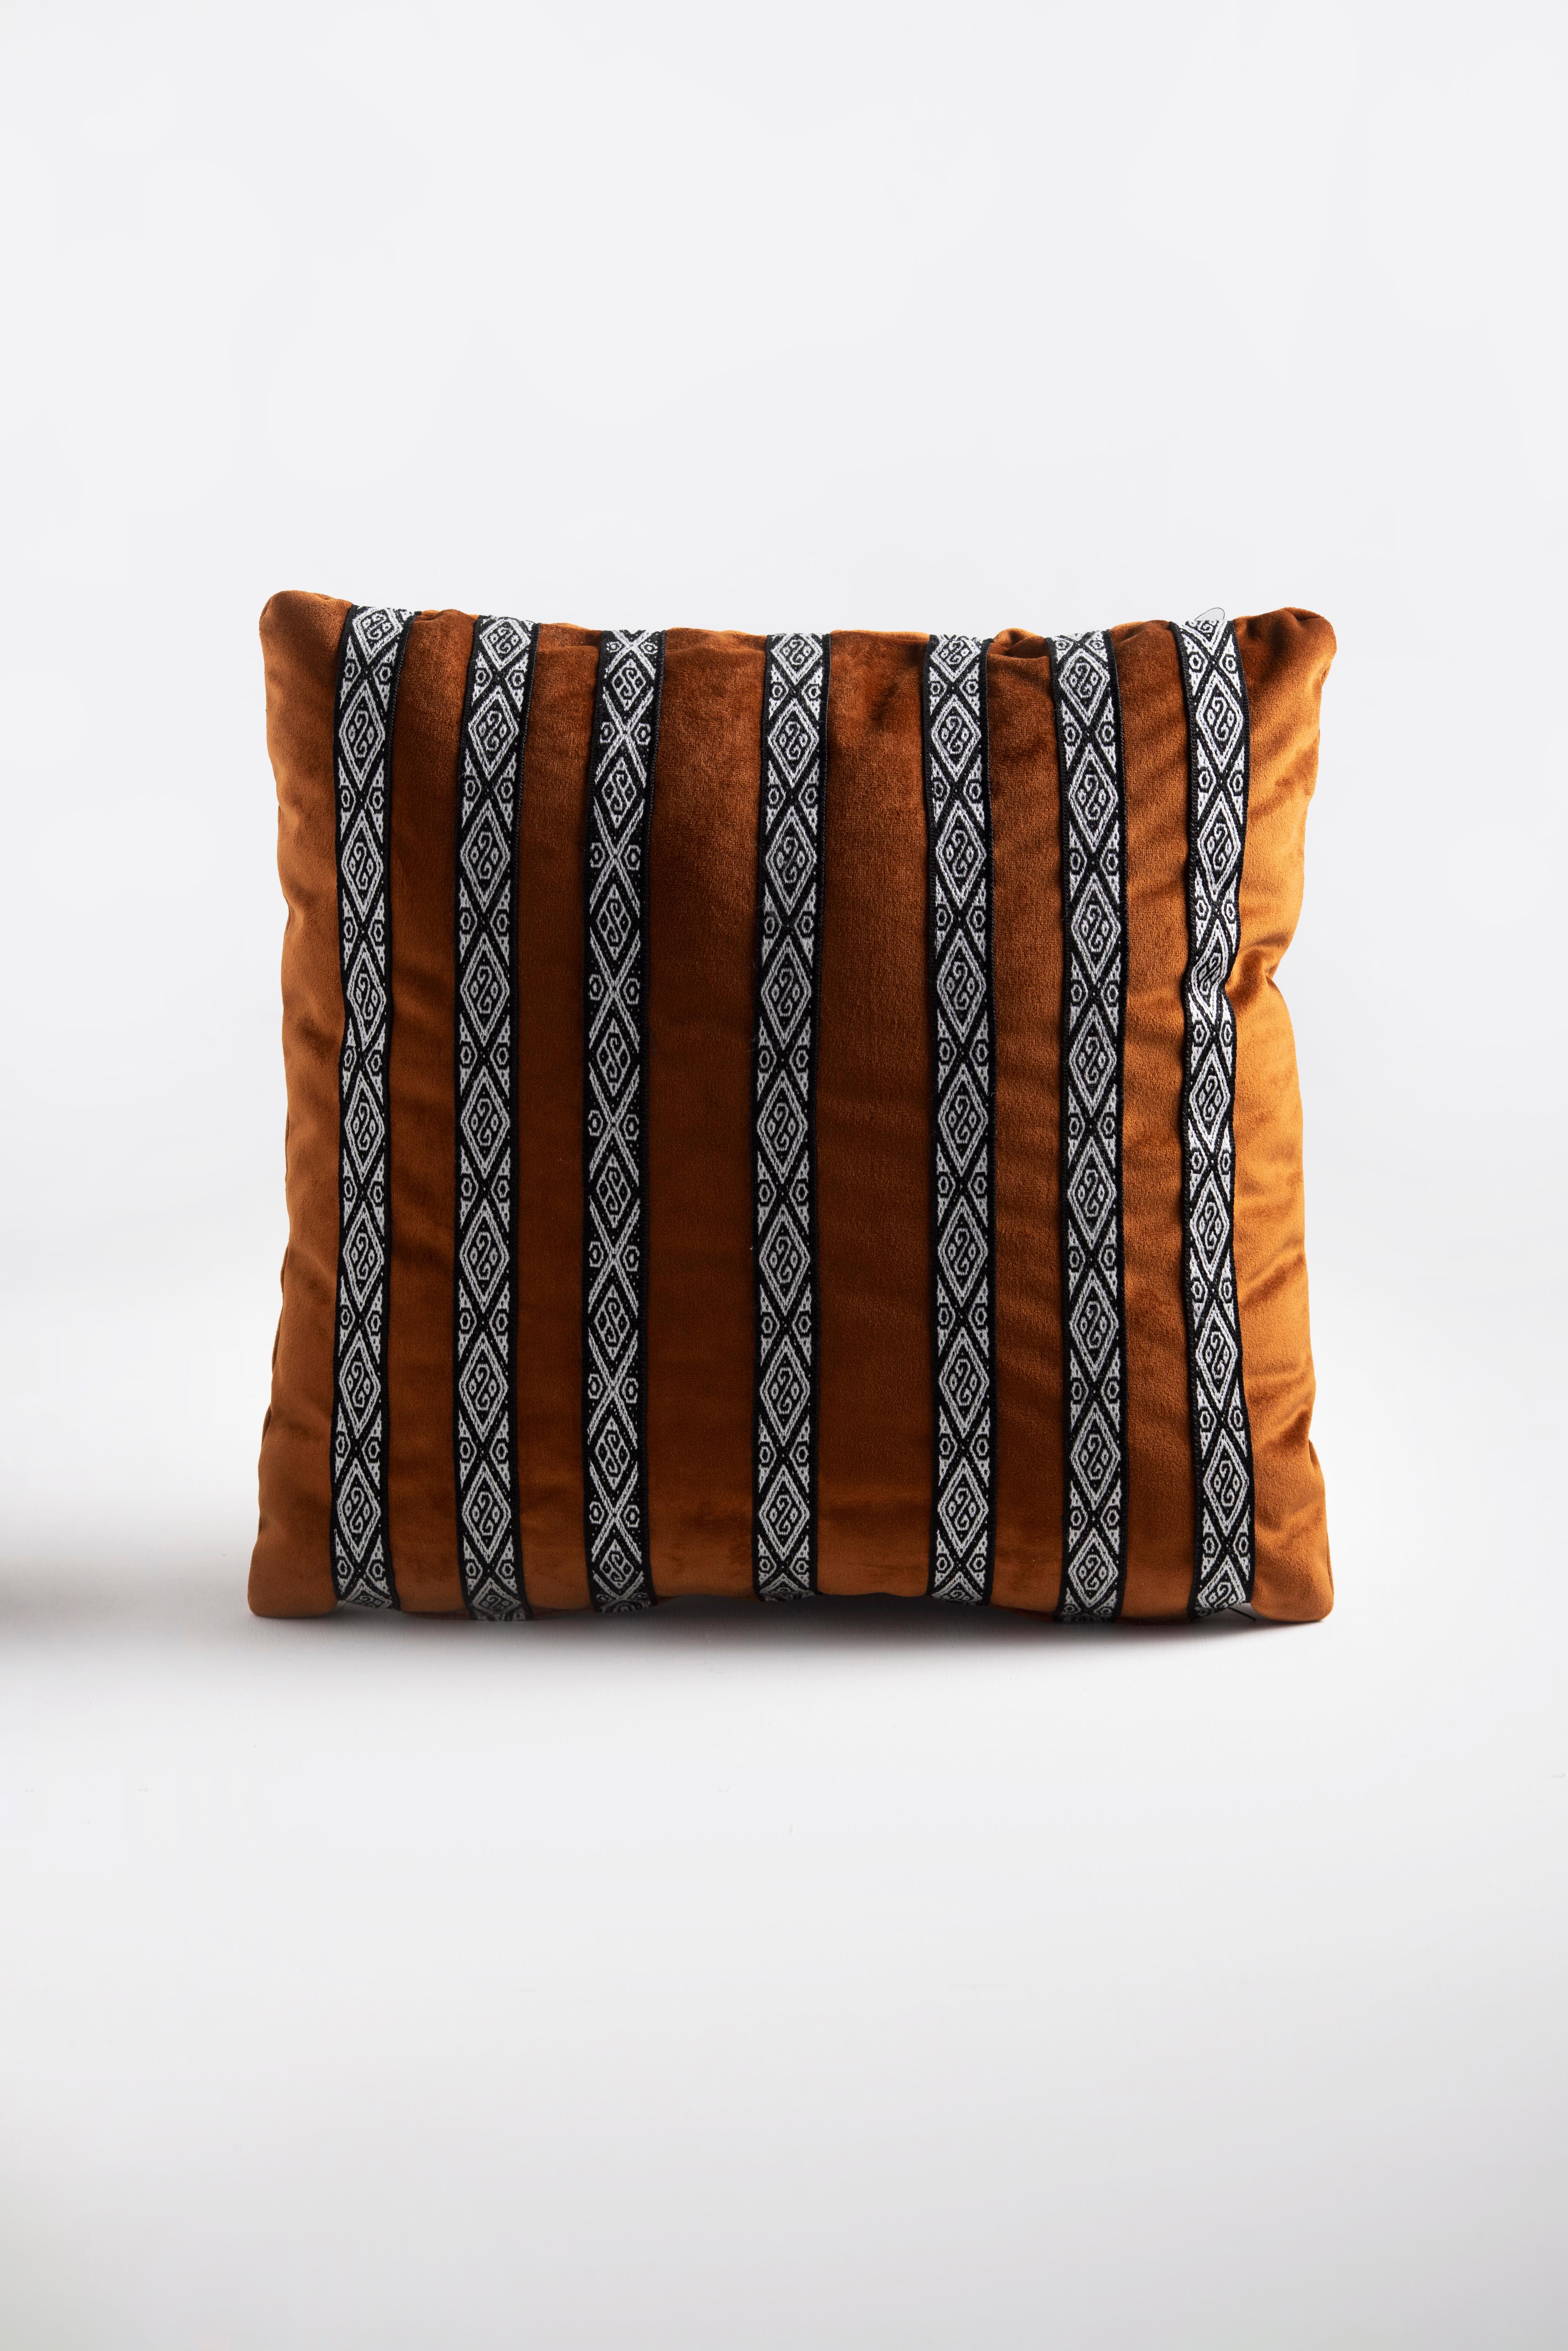 Decorative pillows with handwoven artisanal sash details from Peguche, Imbabura, and waterproof velvet or upholstery fabric.

These decorative cushions are carefully hand-crafted with cotton embroidery and enriched with accents of sheep fur and